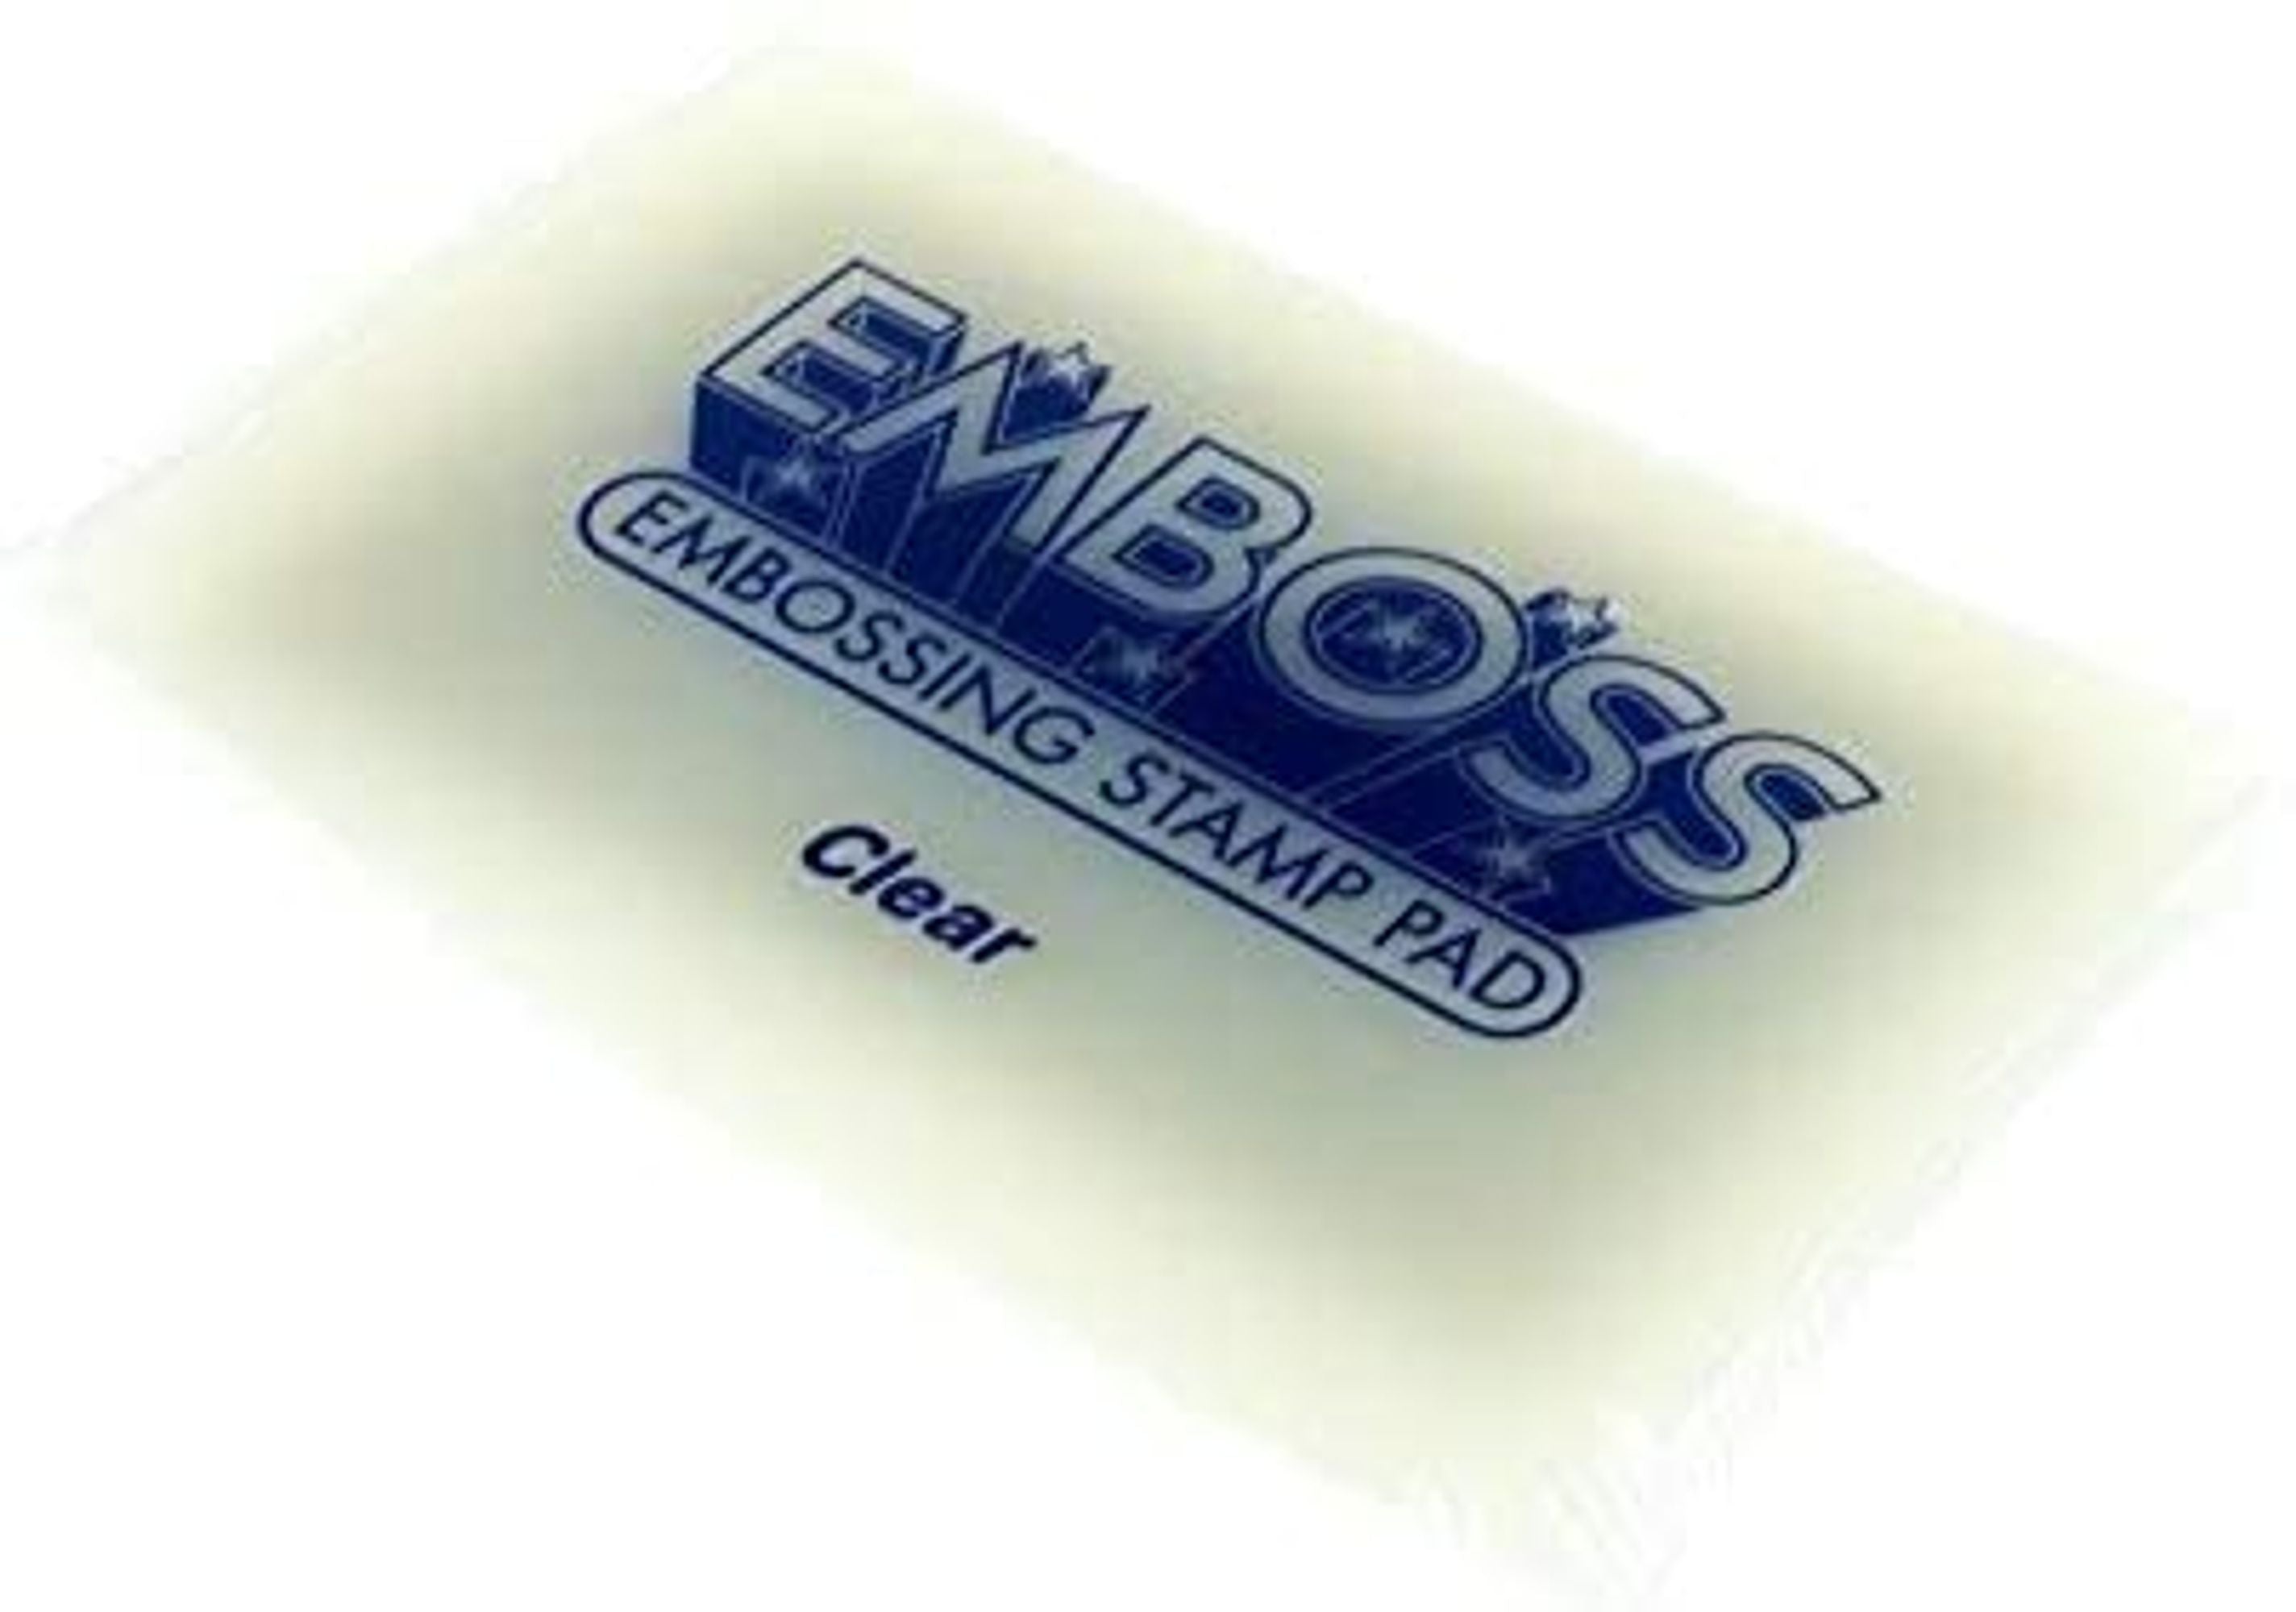 Embossing Stamp Pad - Clear